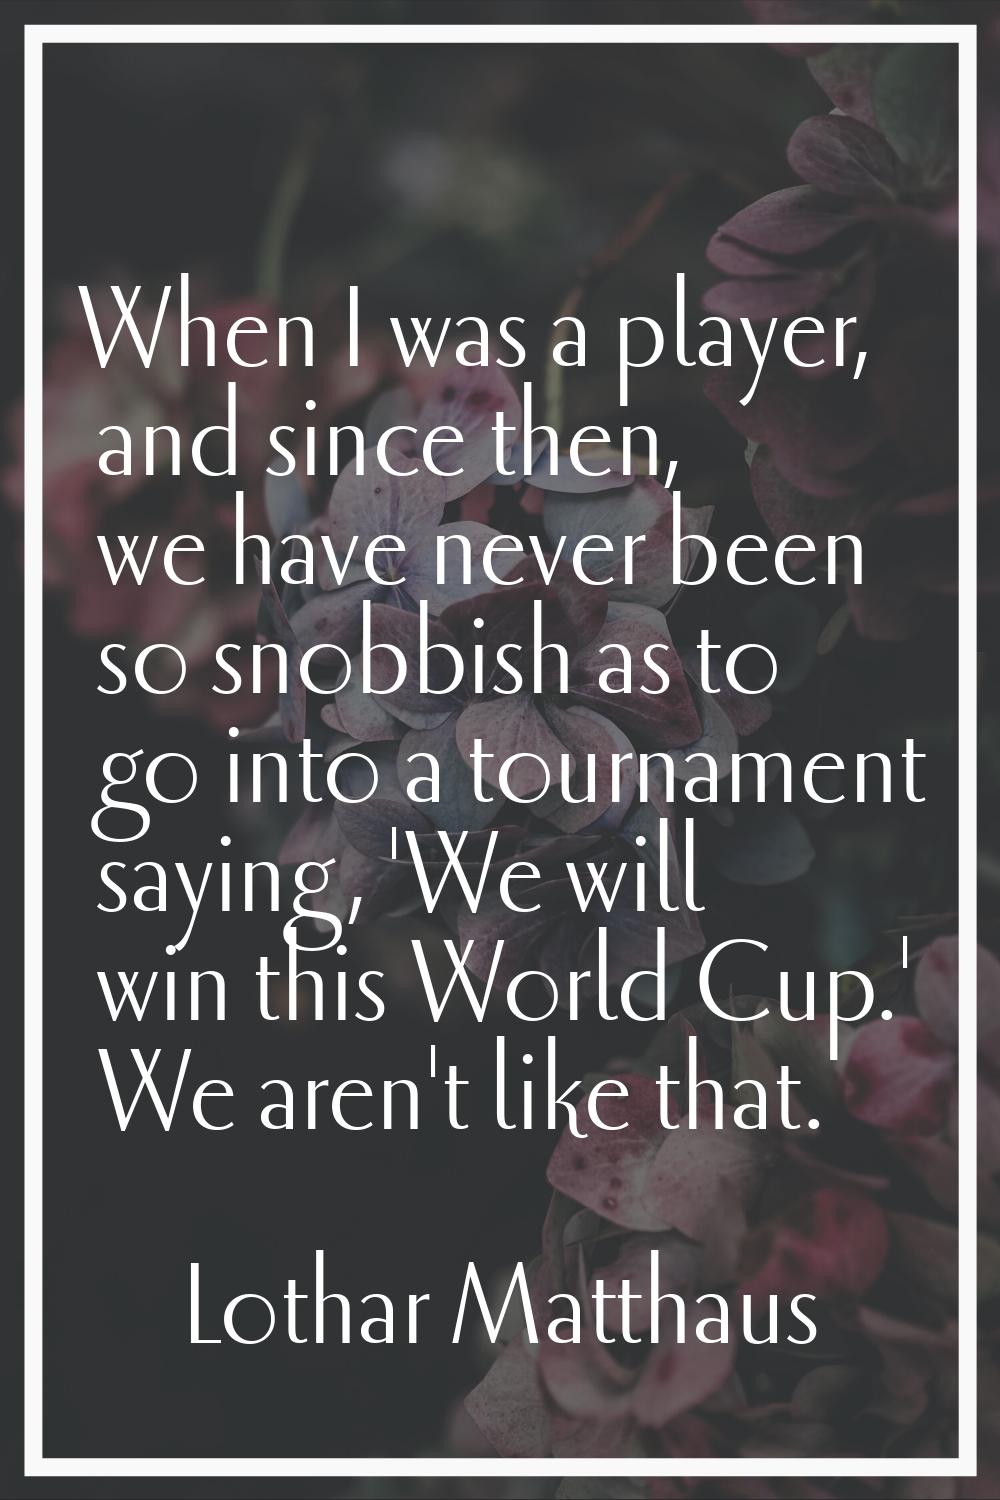 When I was a player, and since then, we have never been so snobbish as to go into a tournament sayi